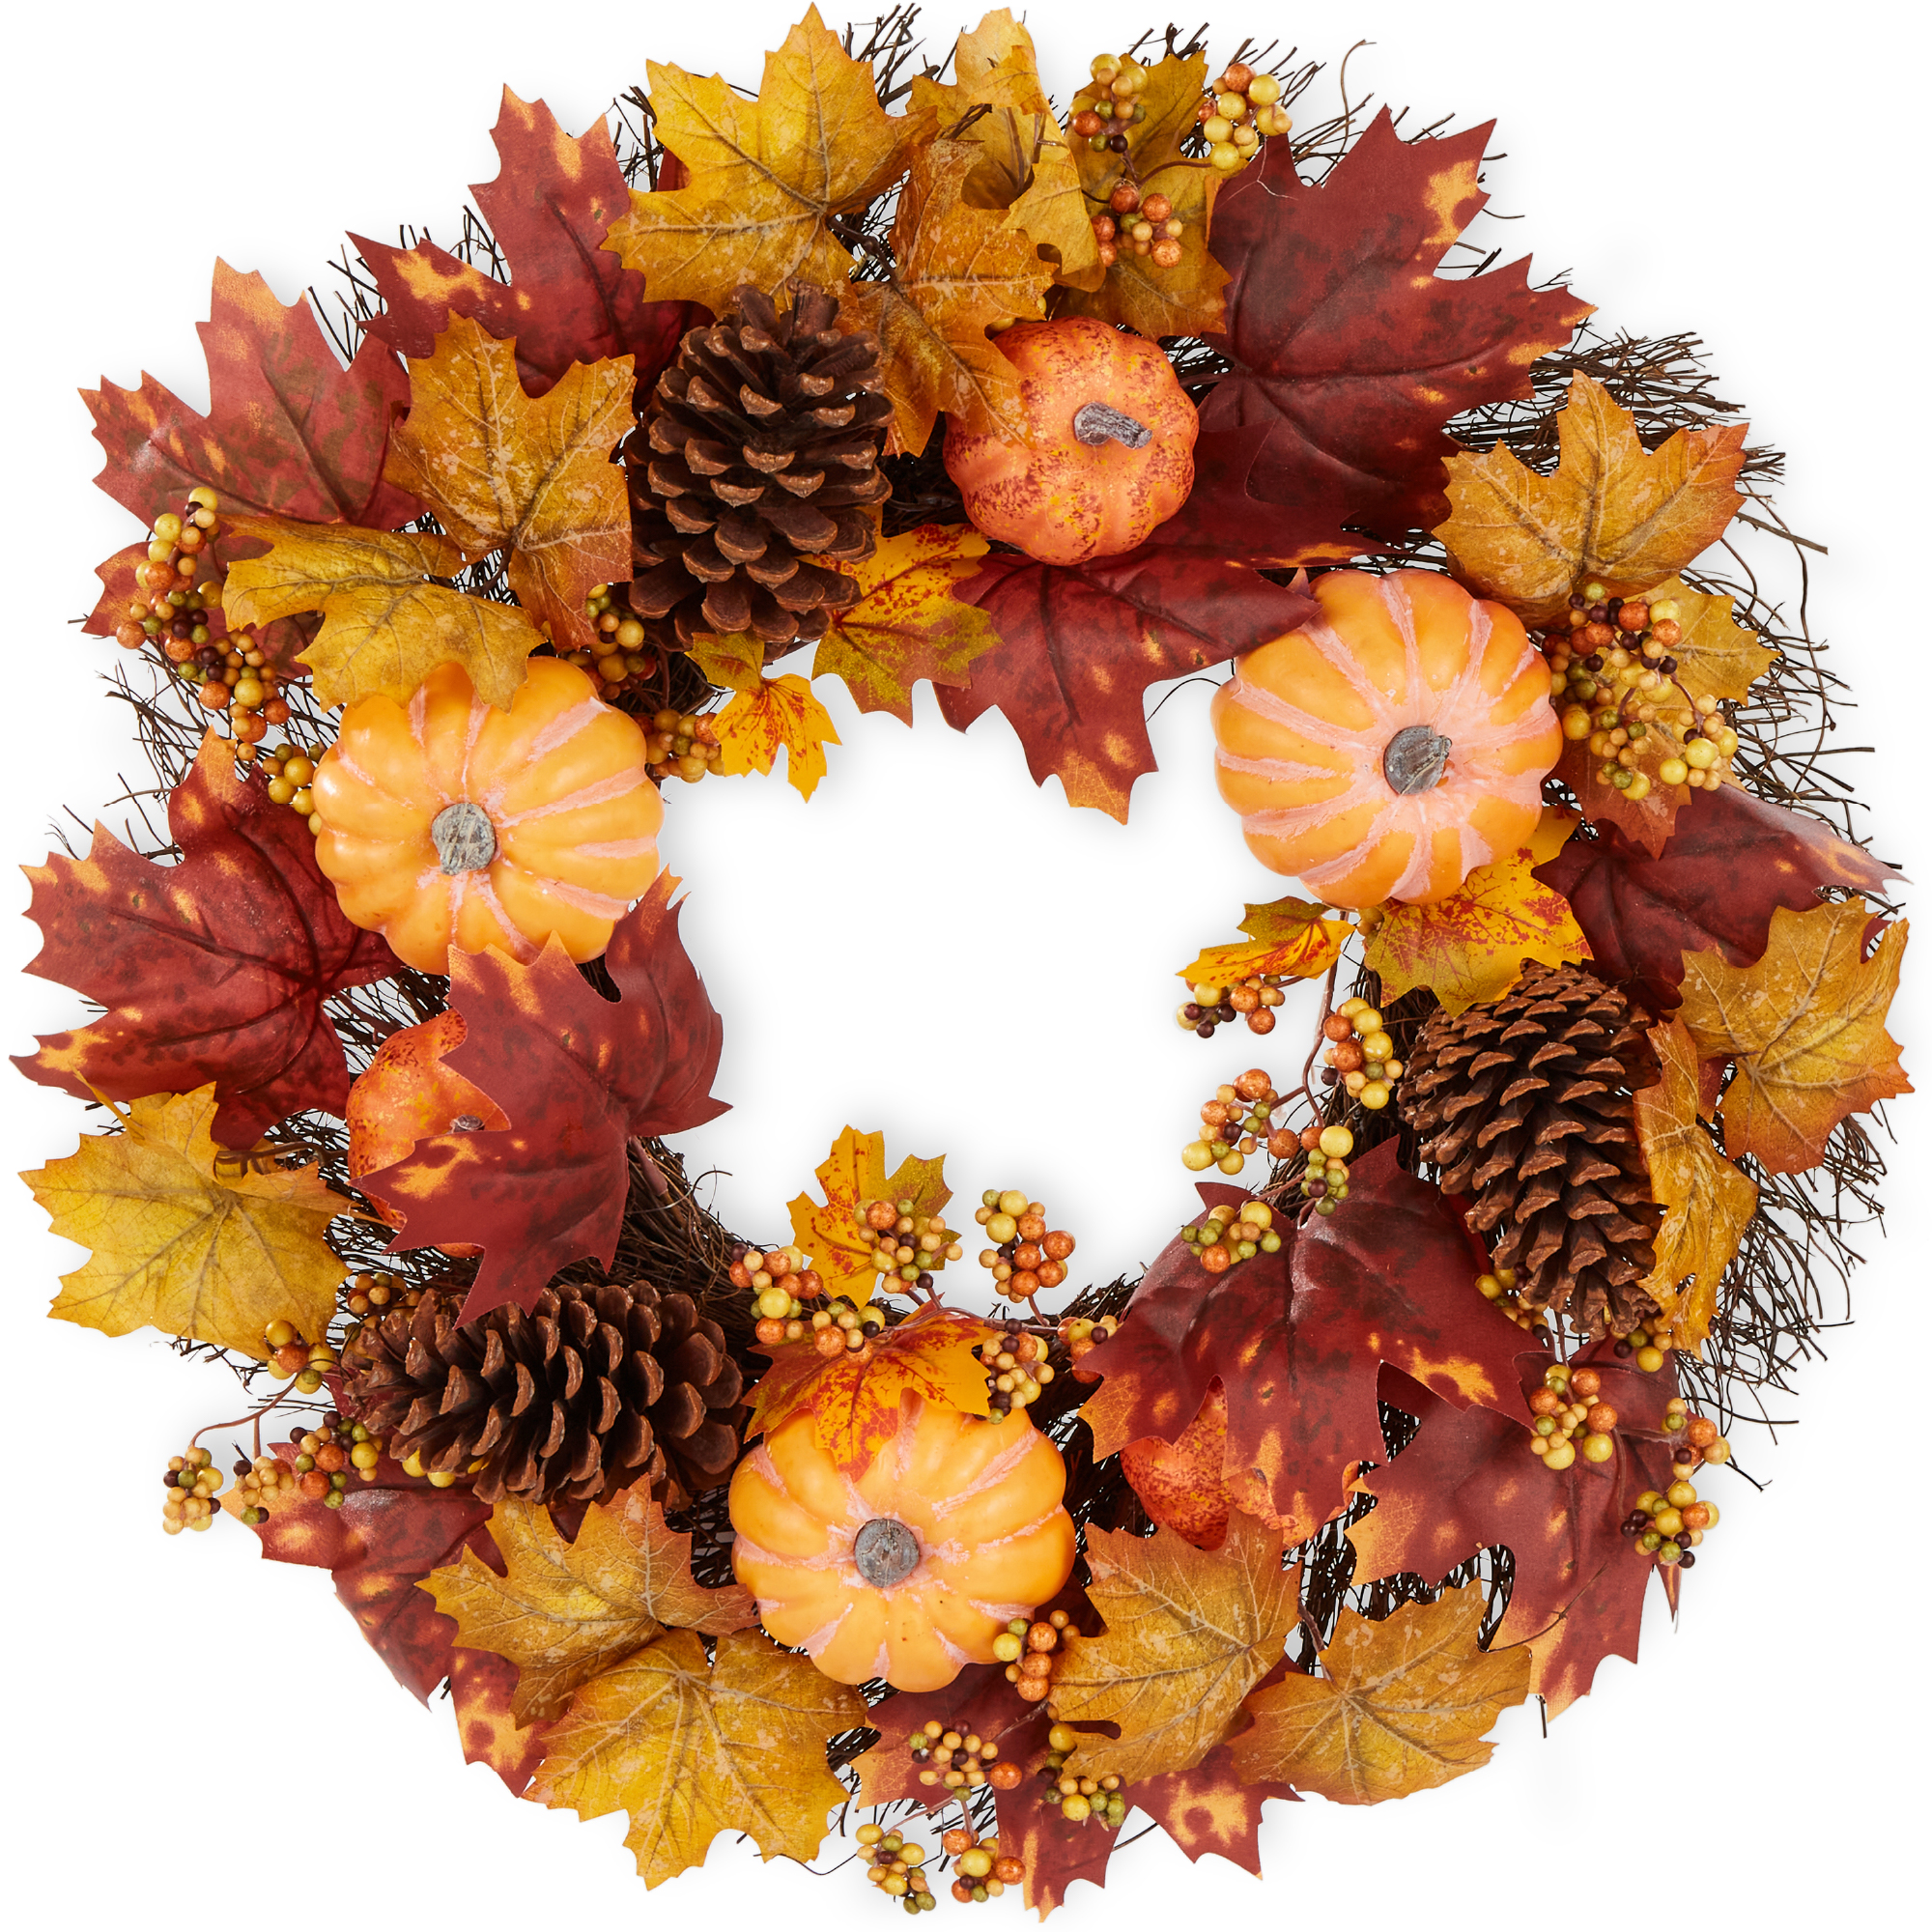 Best Choice Products 24in Artificial Fall Wreath, Autumn Thanksgiving Holiday Decoration w/ Pumpkins, Pine Cones - image 1 of 7